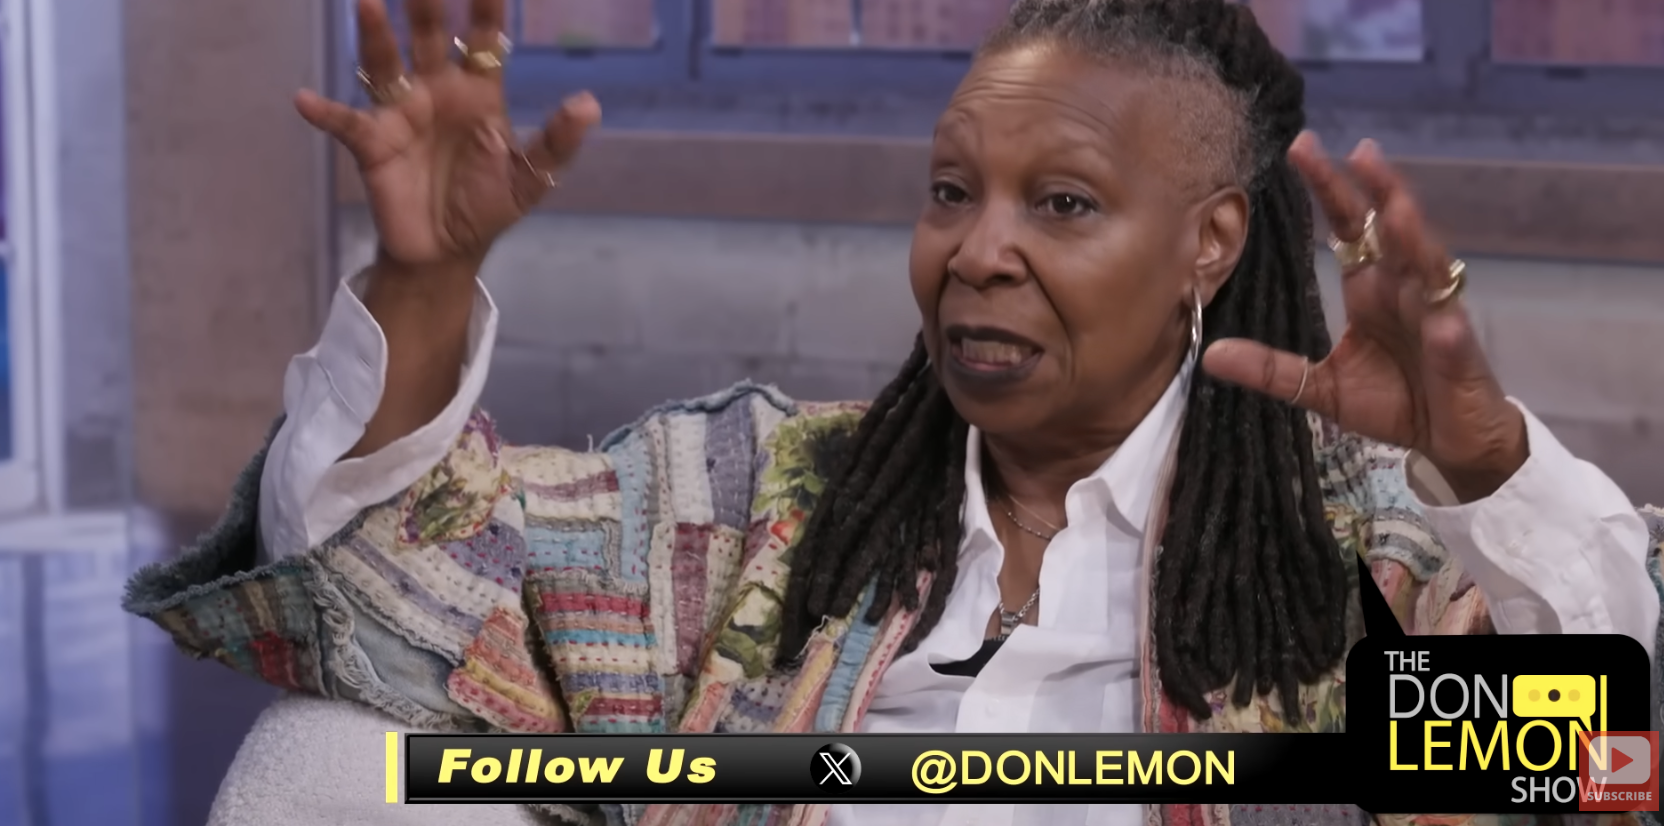 Whoopi Goldberg gestures while speaking on &quot;The Don Lemon Show,&quot; wearing a multicolored jacket